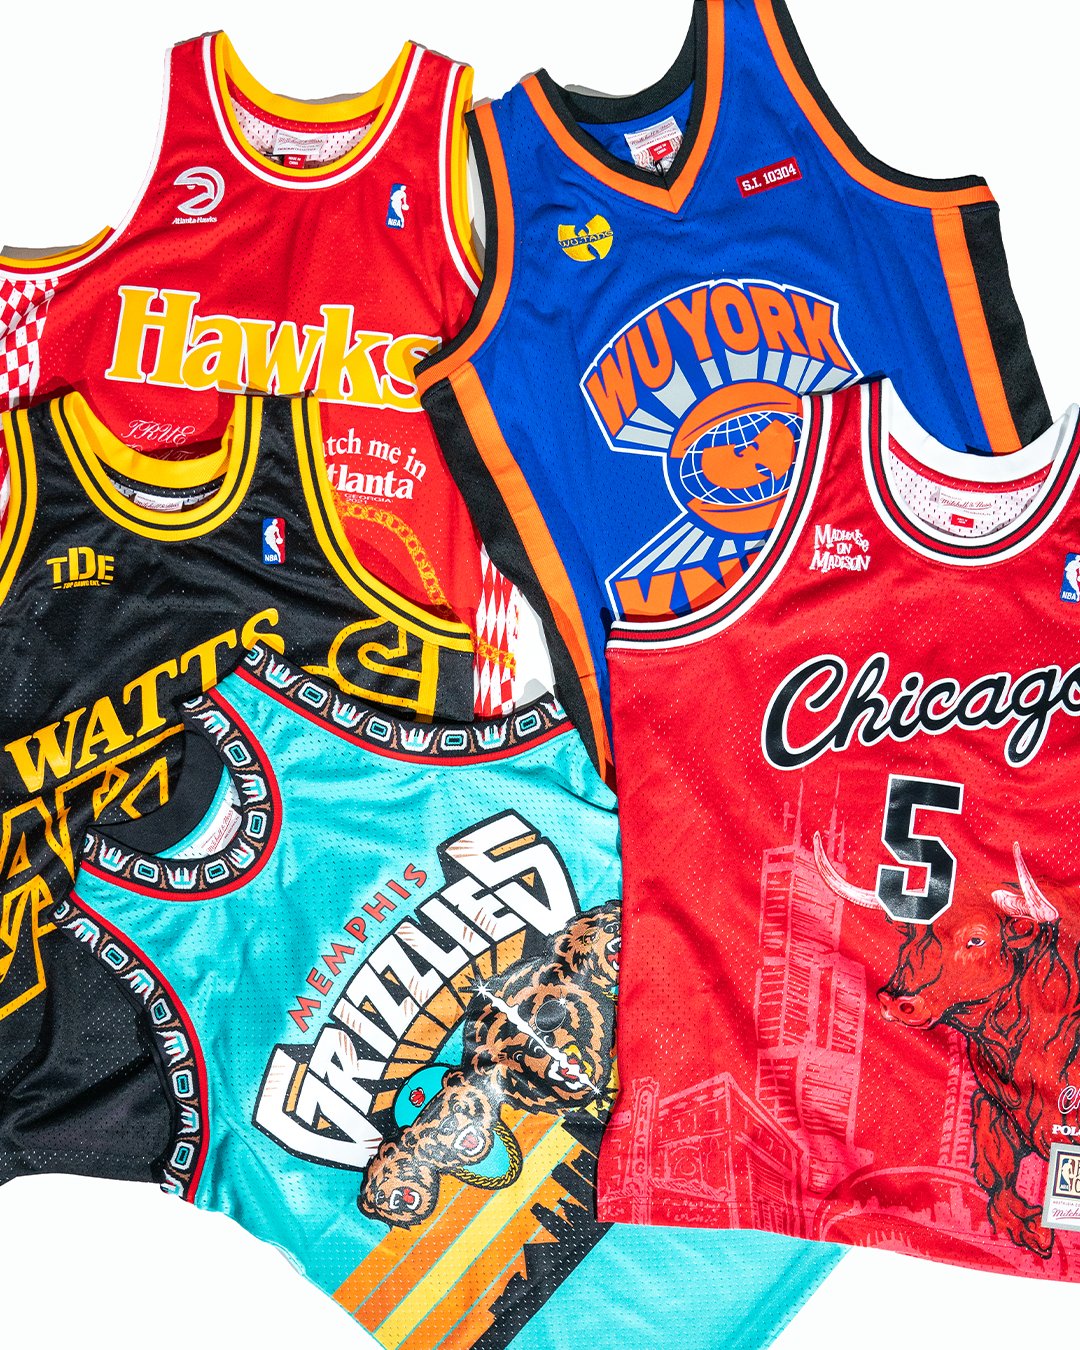 We linked up with five artists to remix their hometown NBA jerseys 🔥 —  @topdawgent x Lakers — @wutangclan x Knicks — @lilbaby x Hawks…